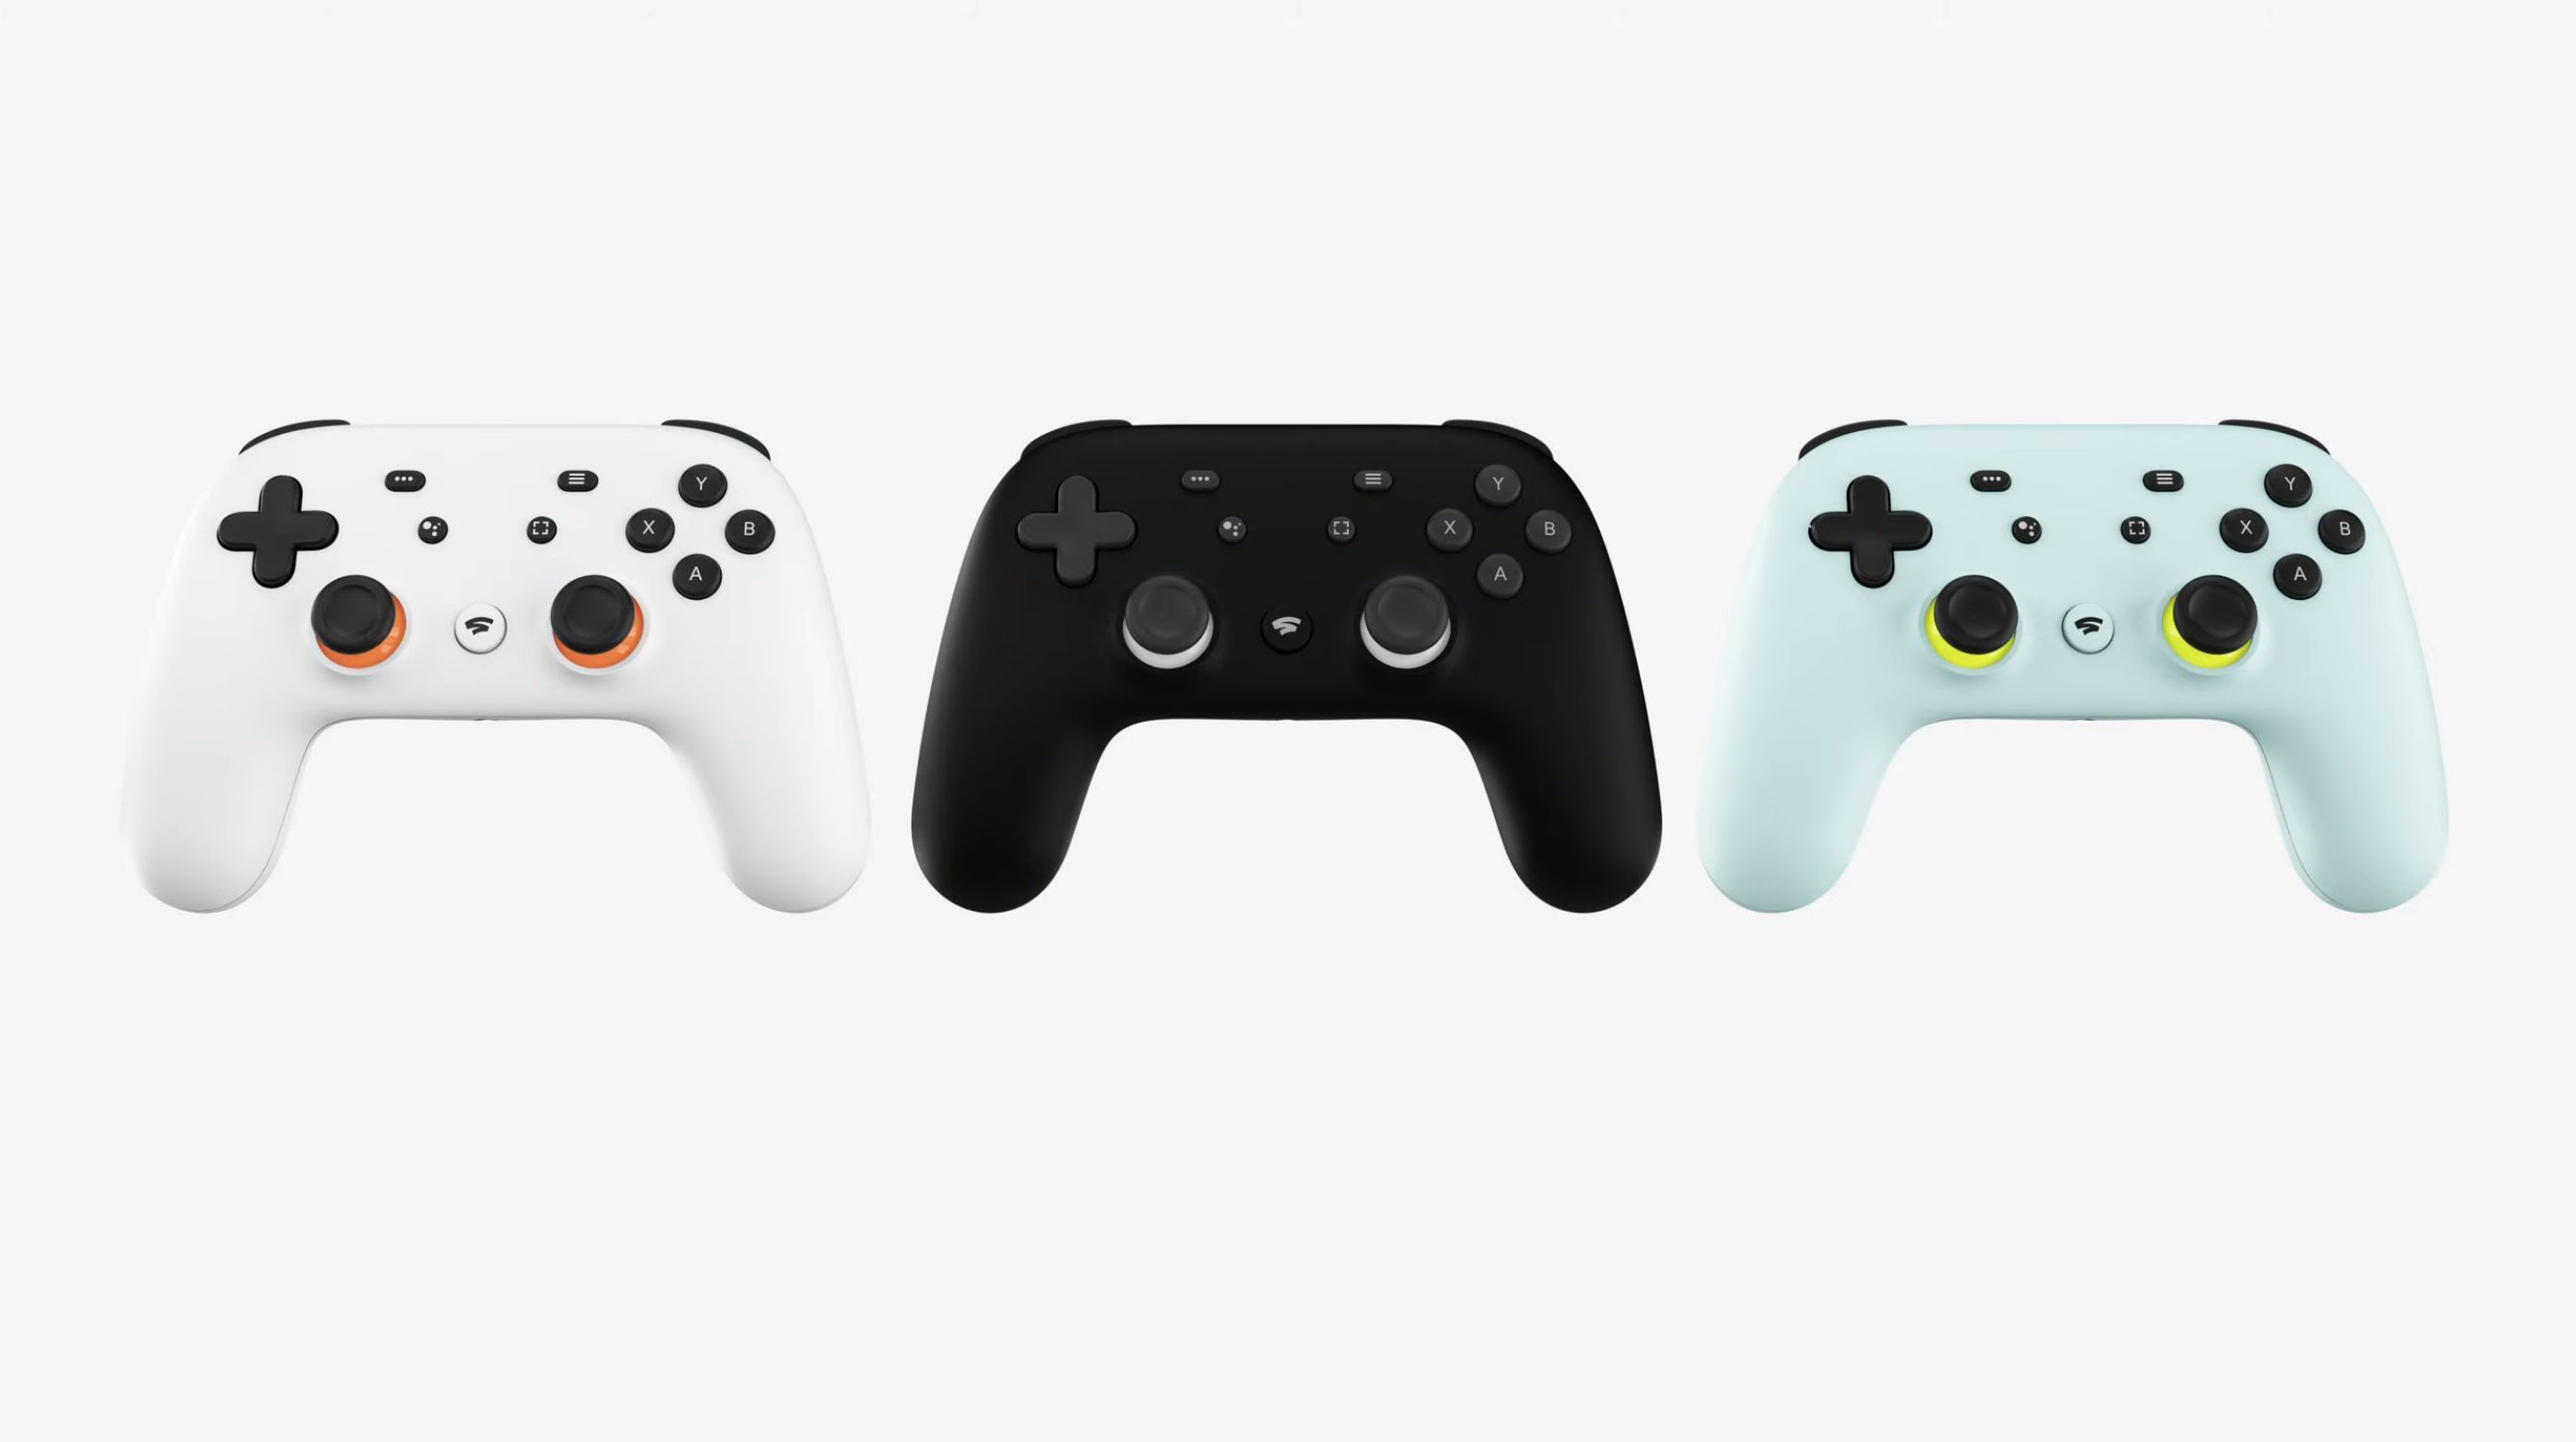 Google's gaming console rumored to be presented at GDC